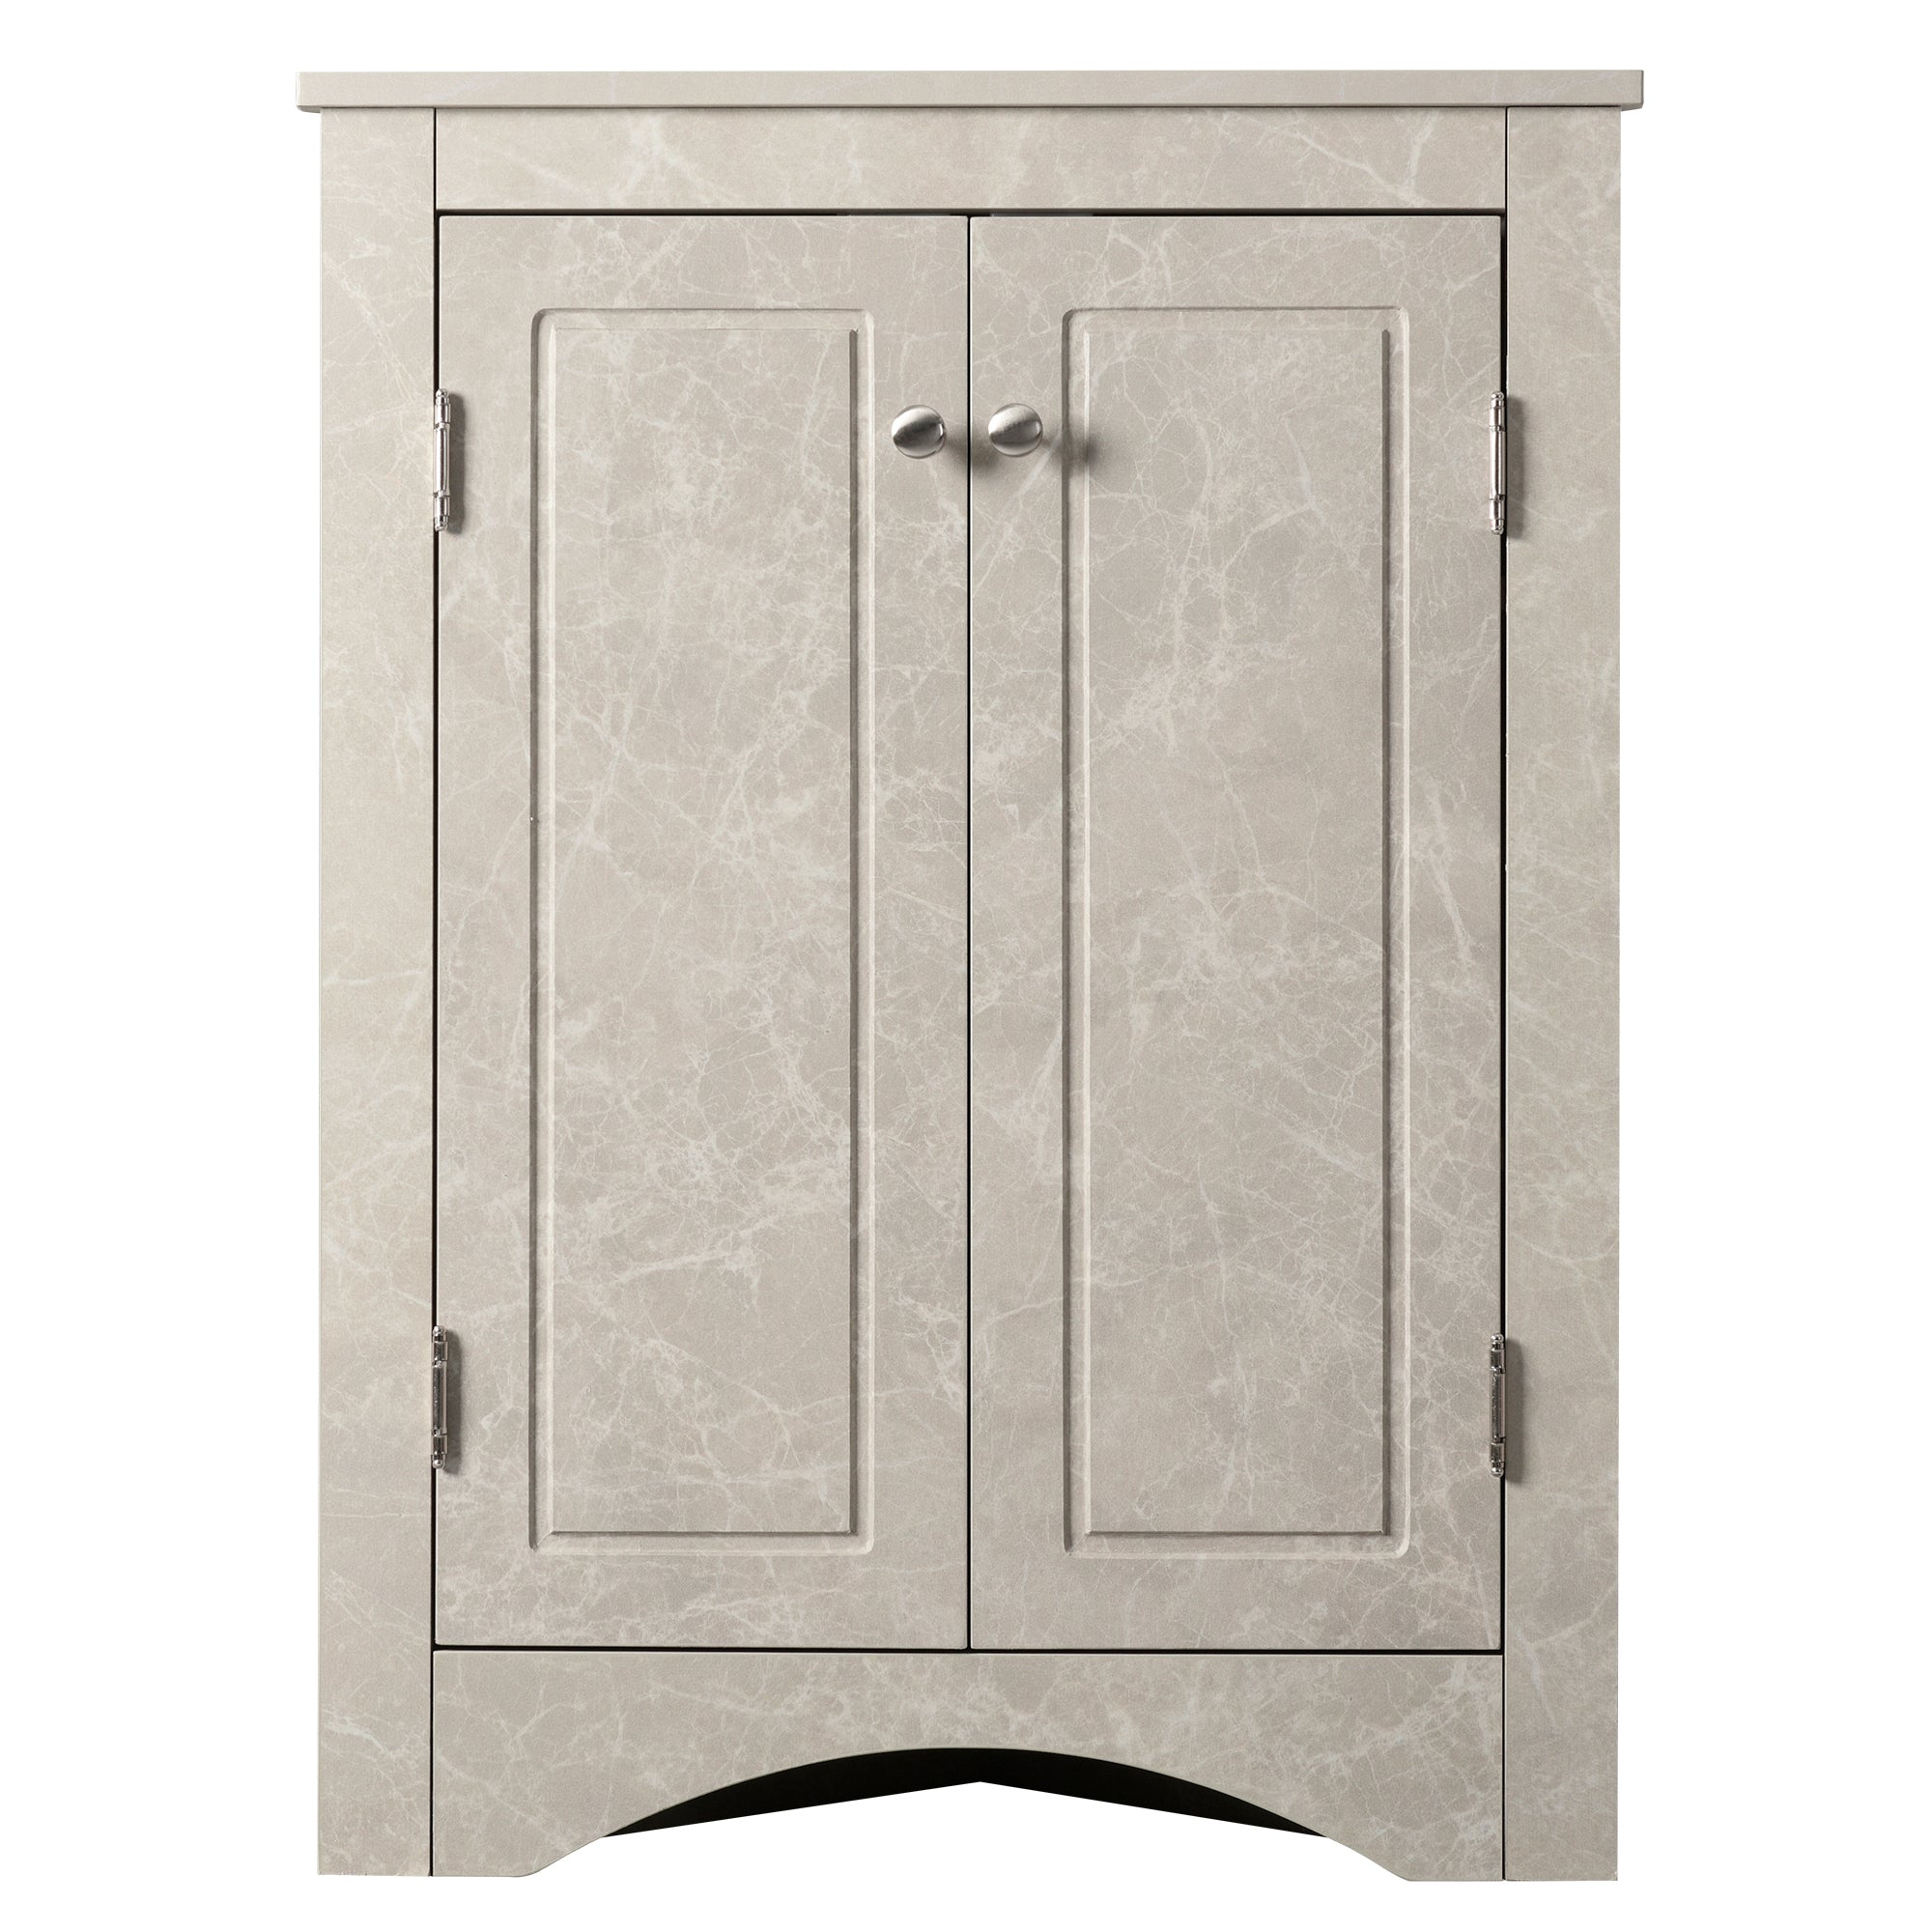 White Marble Triangle Bathroom Storage Cabinet with Adjustable Shelves